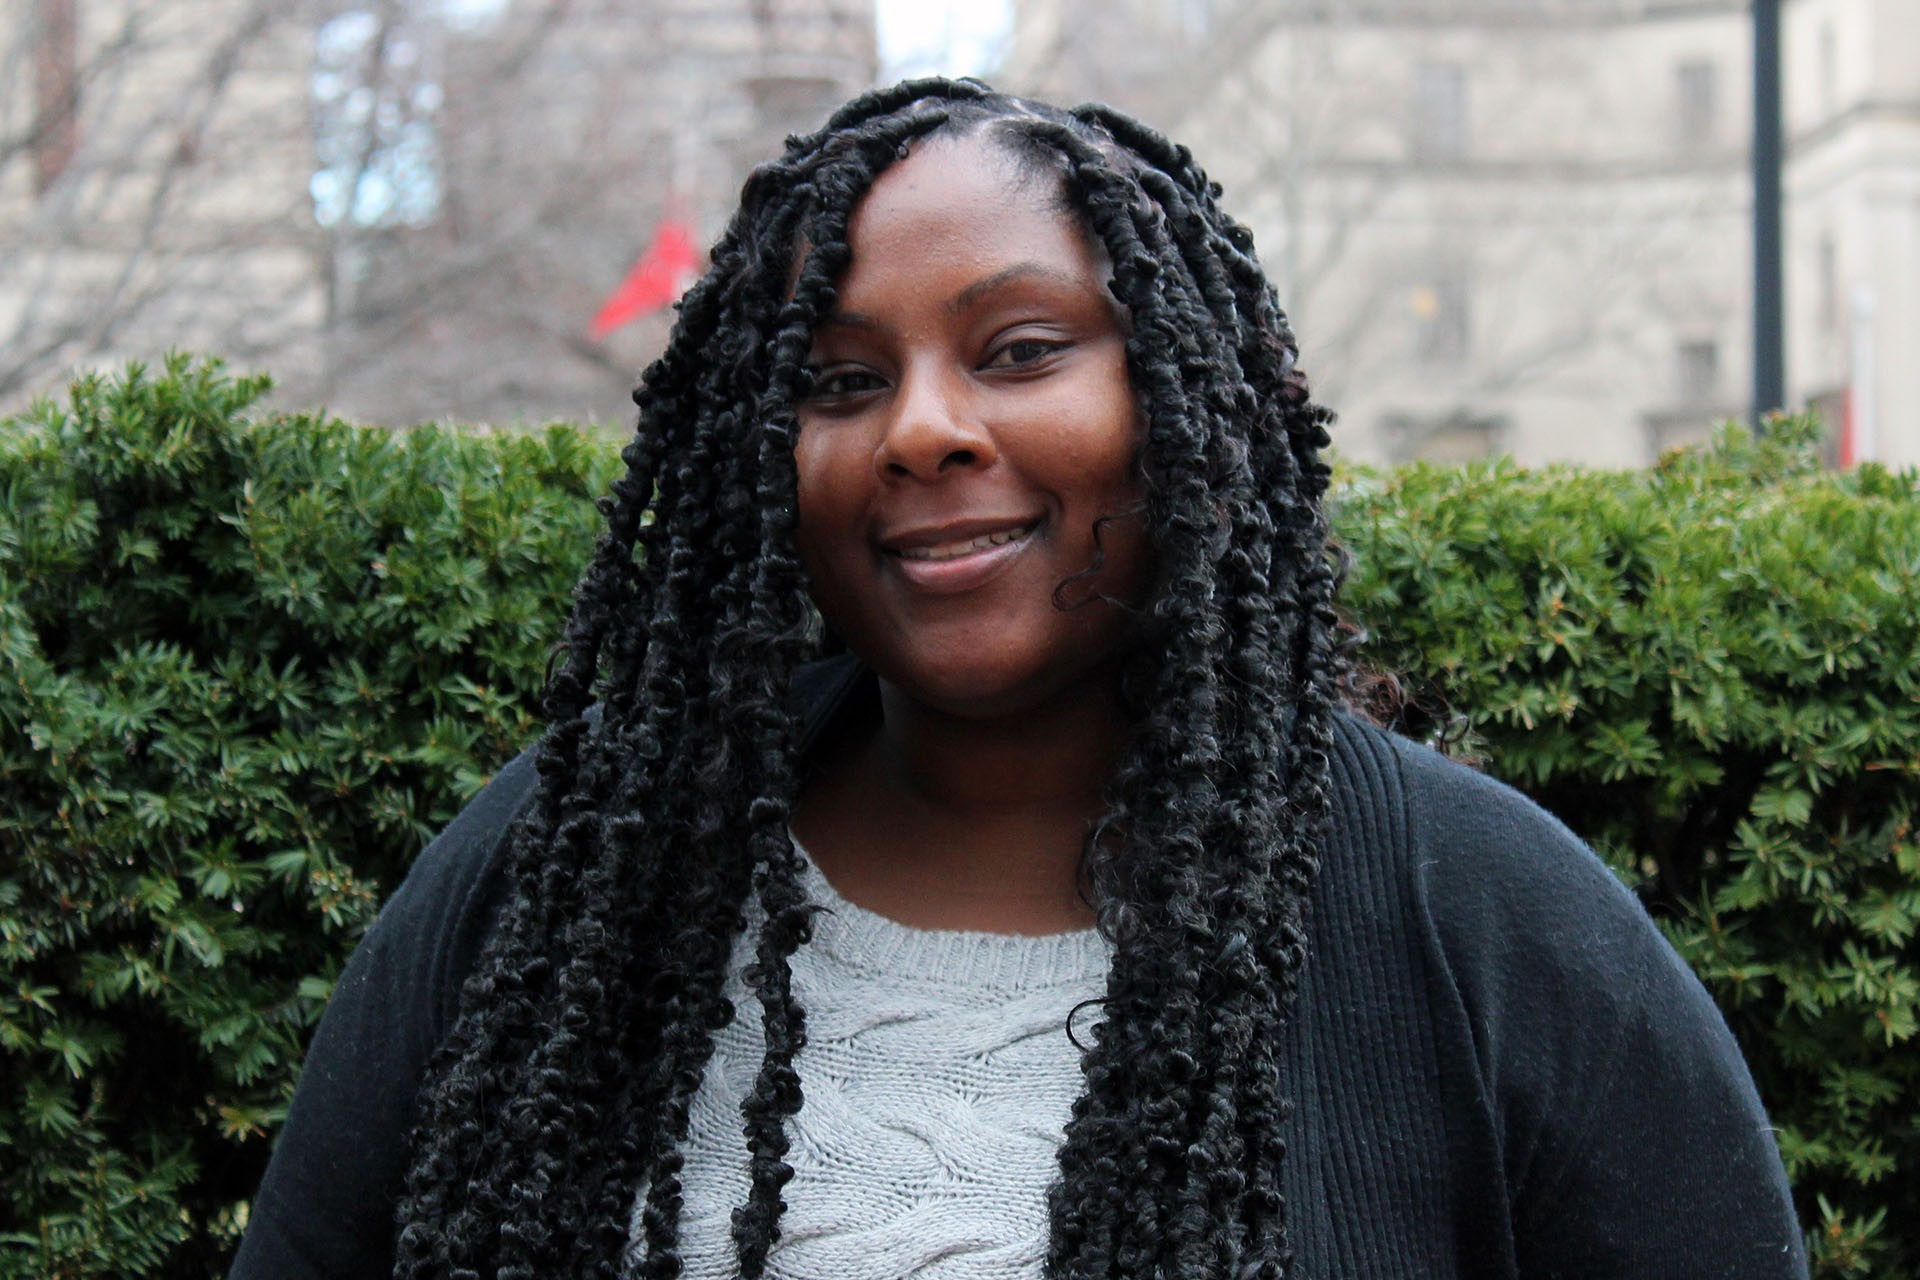 Head shot of Dionne Douglas on campus in front of shrubbery